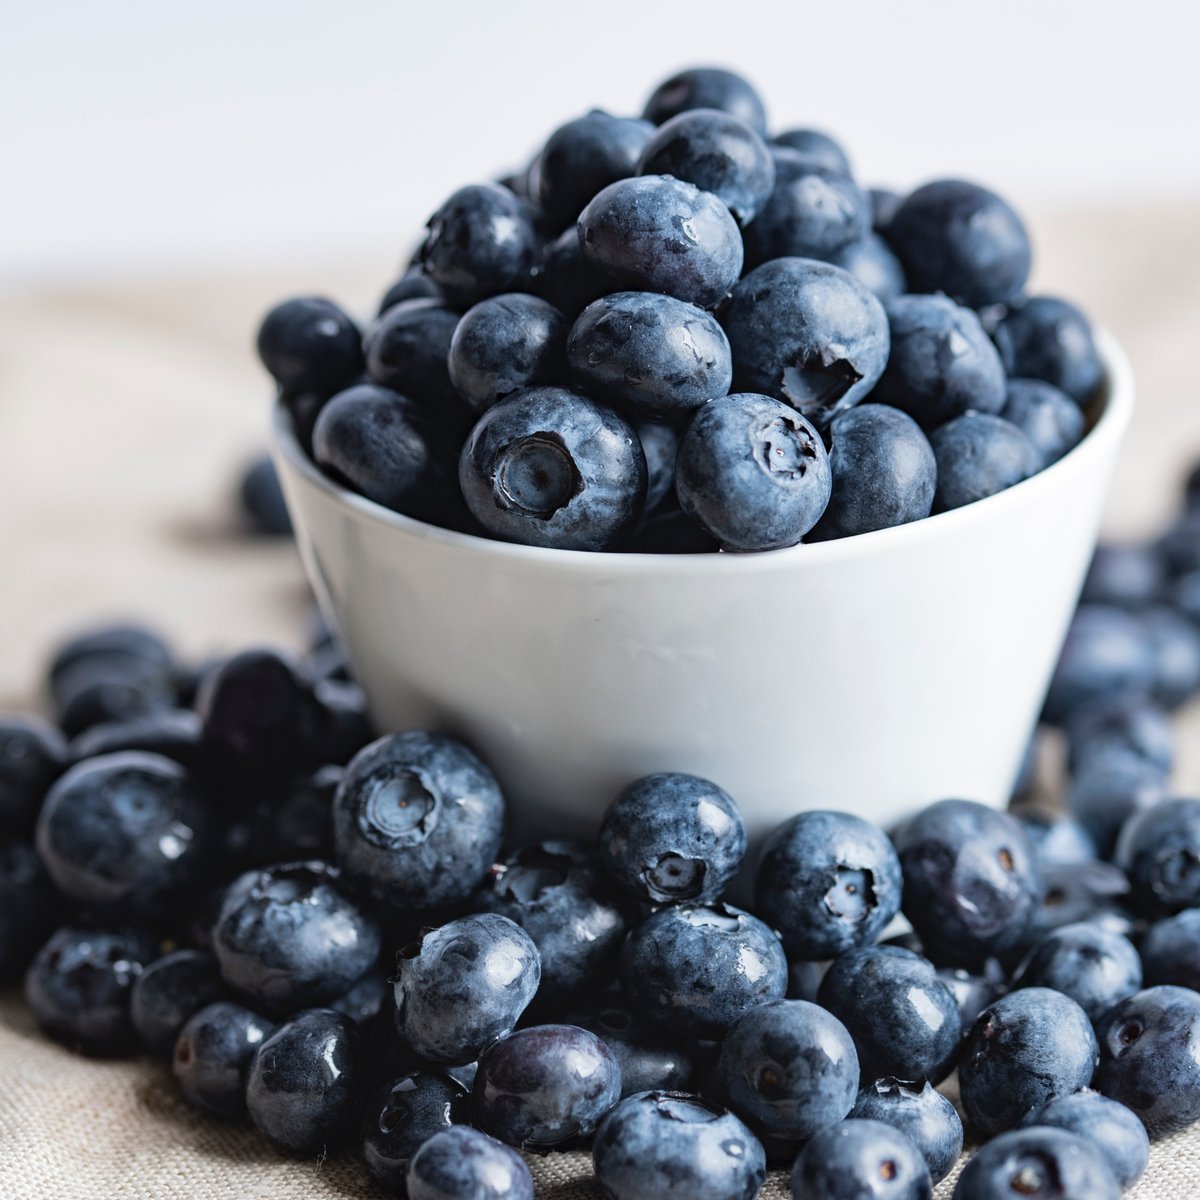 Blueberries were called “star berries” by Native Americans because the blossom at the end of the berries looks like a five-pointed star. #thewordofmouth #foodtrivia #blueberryseason